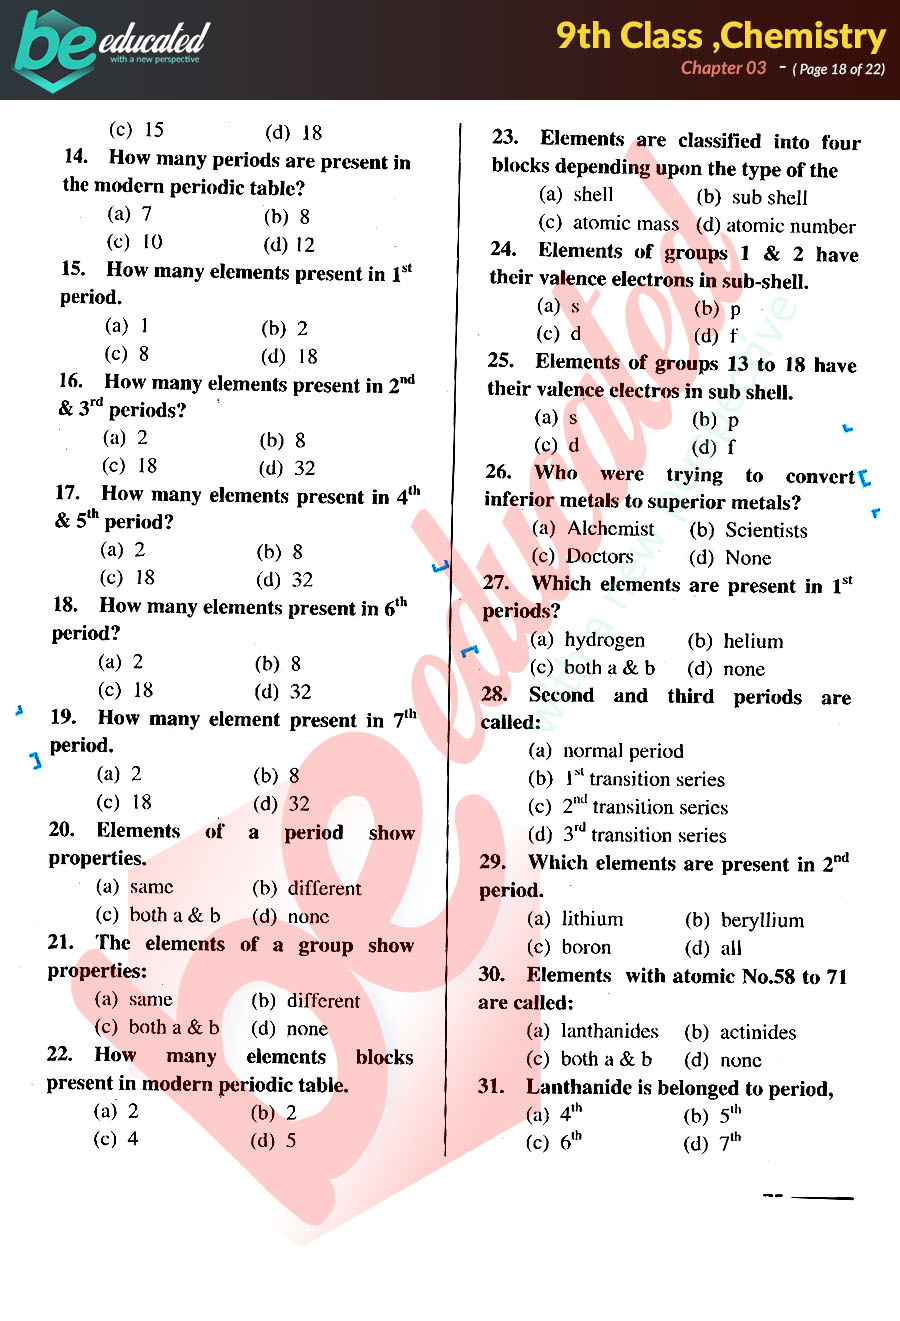 9th class chemistry notes pdf download